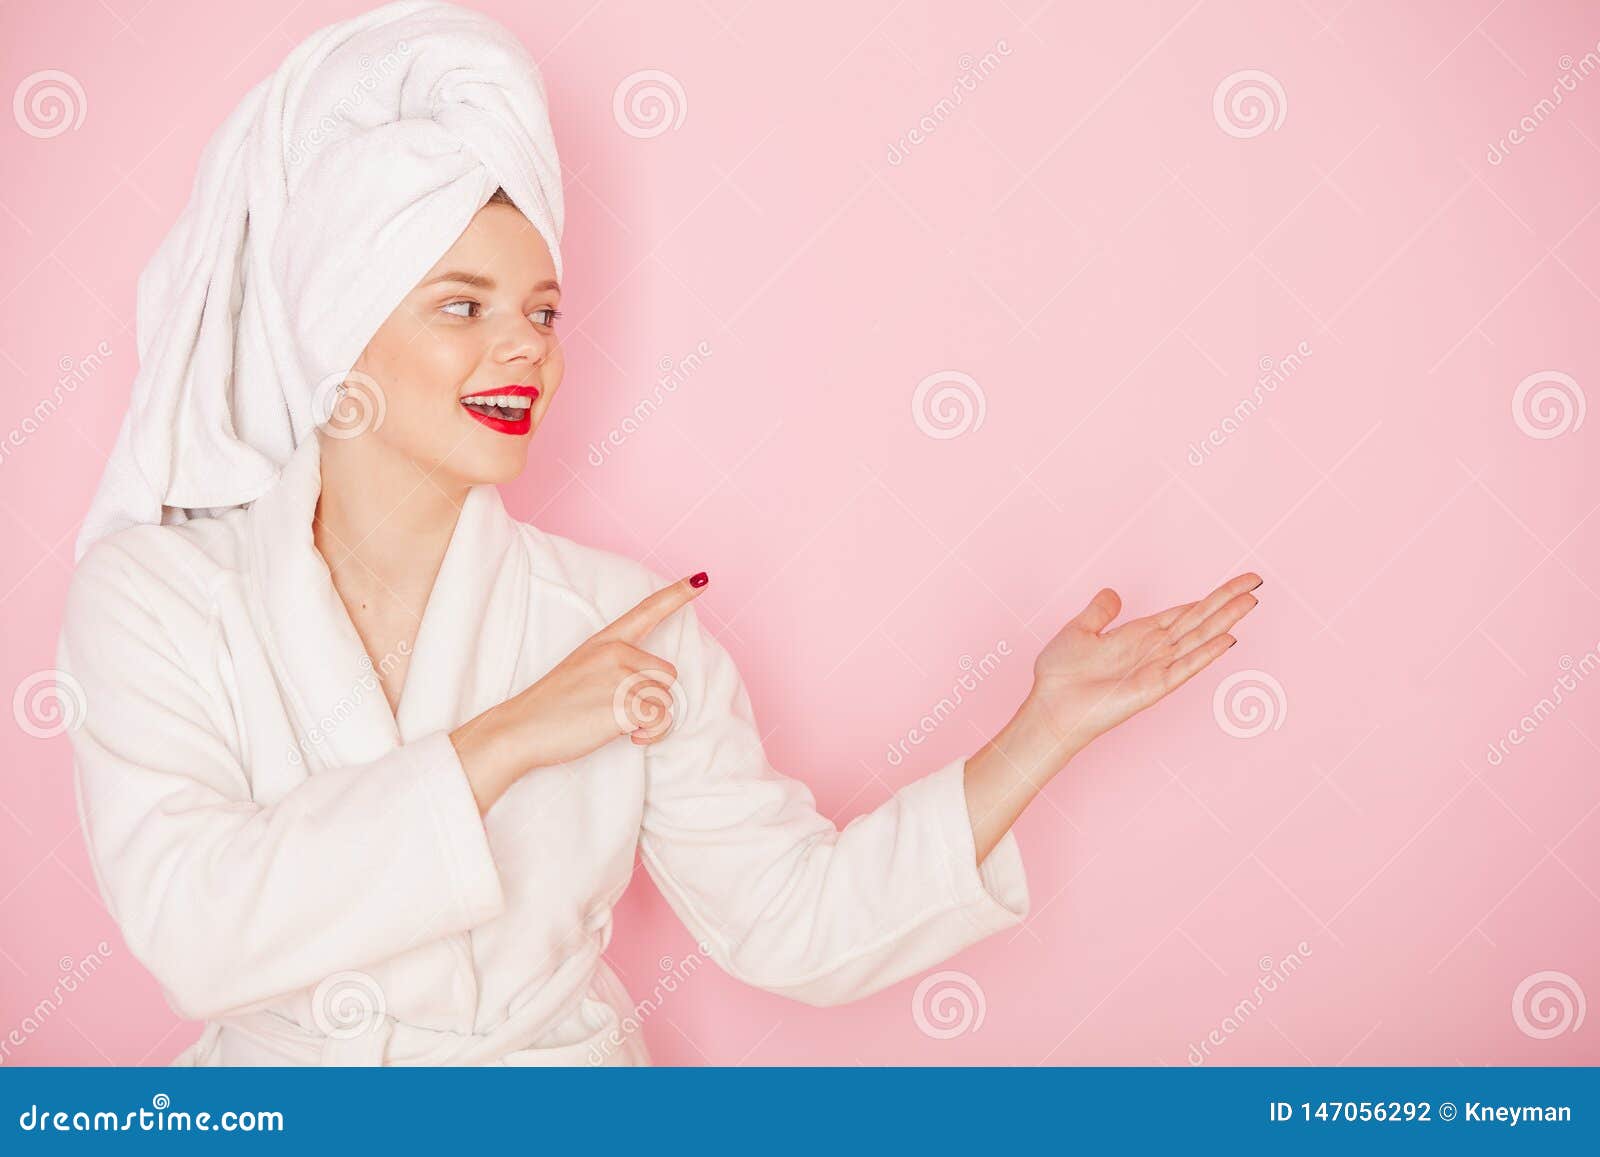 beauty young woman with red lips standing in the bath robe and towel on the head on the pink background. studio shot